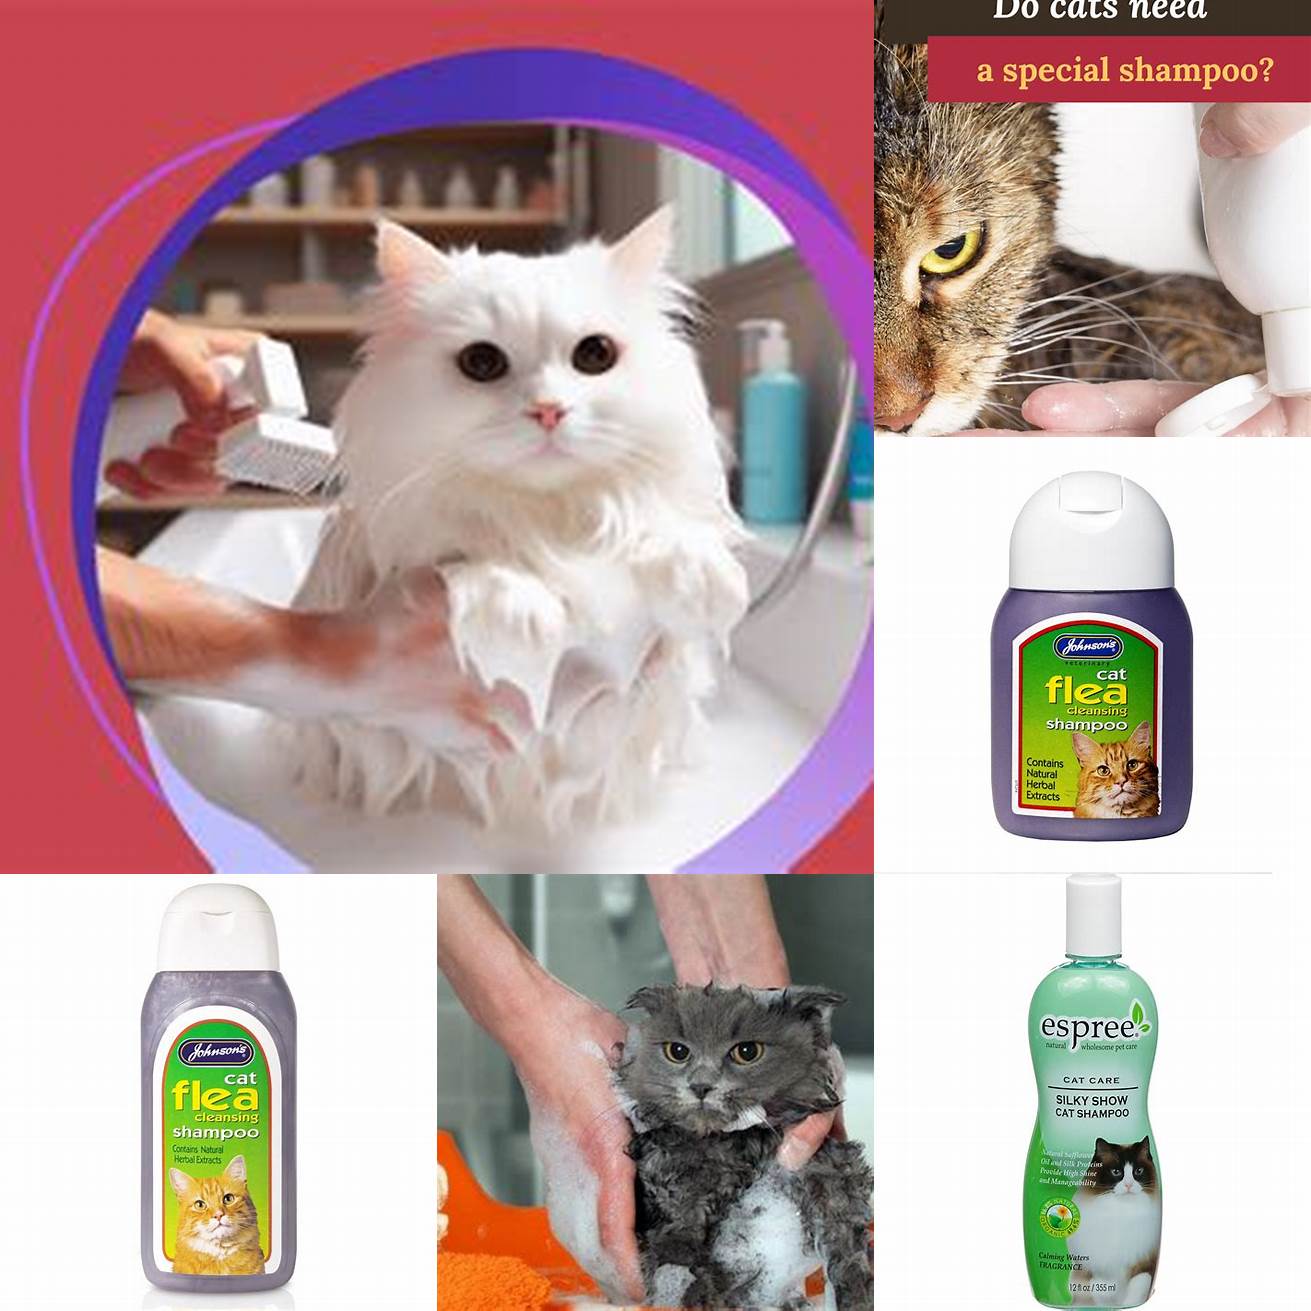 5 Use a cat-specific shampoo